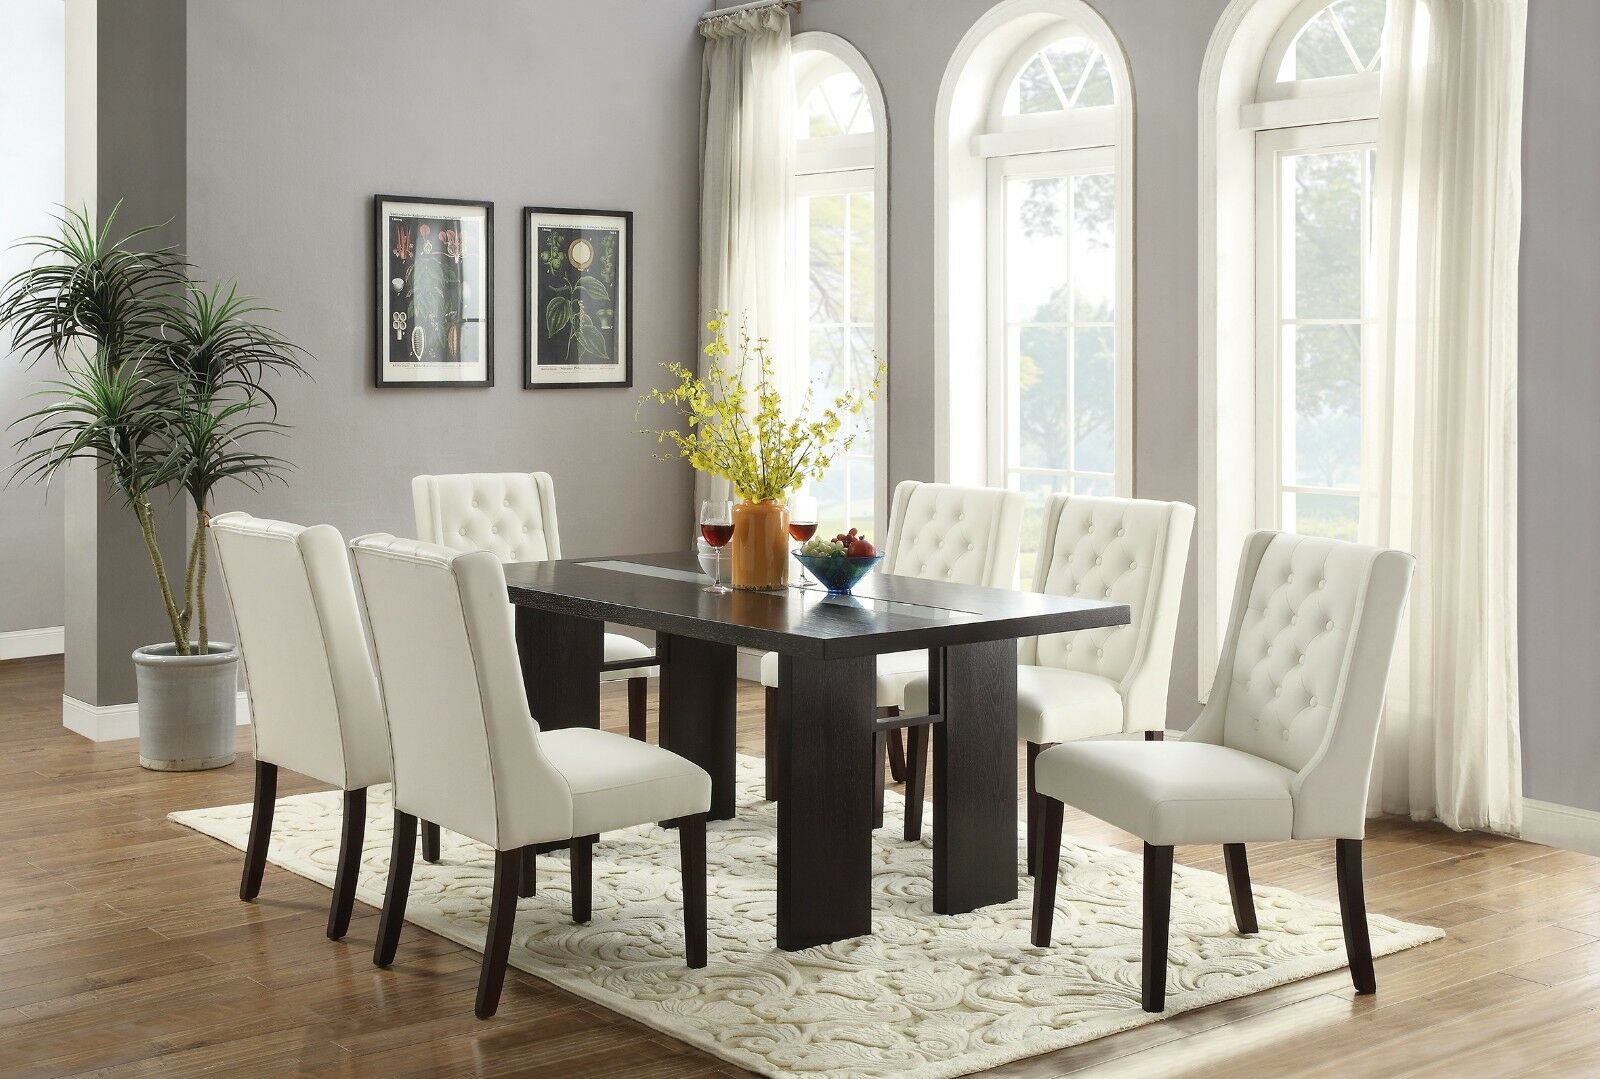 Kitchen and Dining Room Chairs